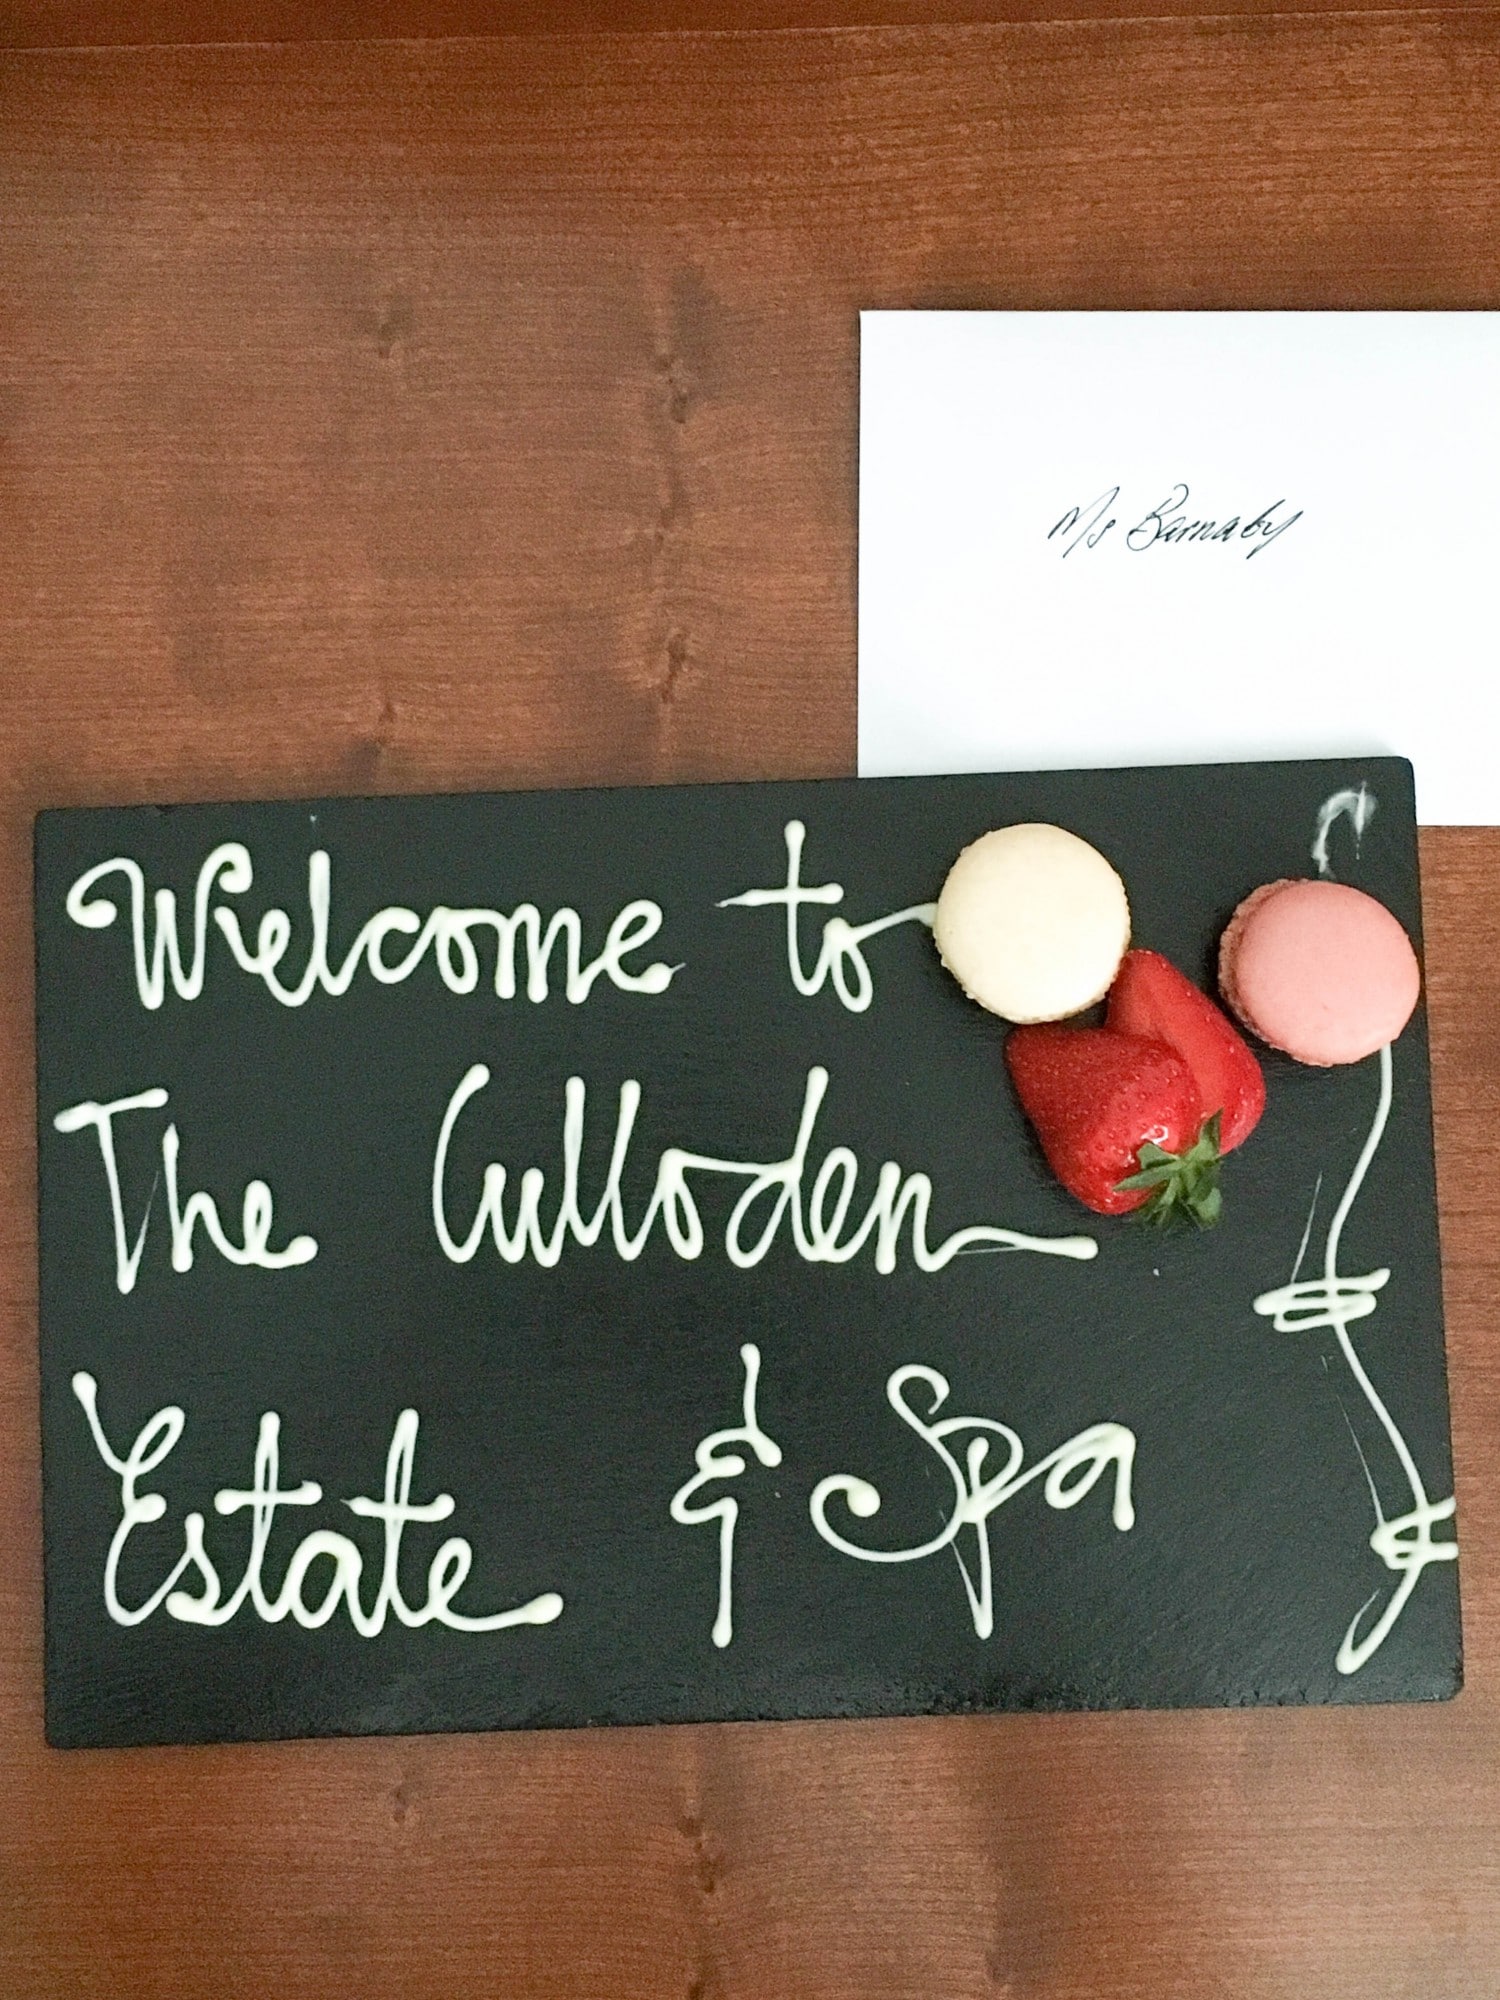 Culloden Hotel Review & Spa Welcome Mat